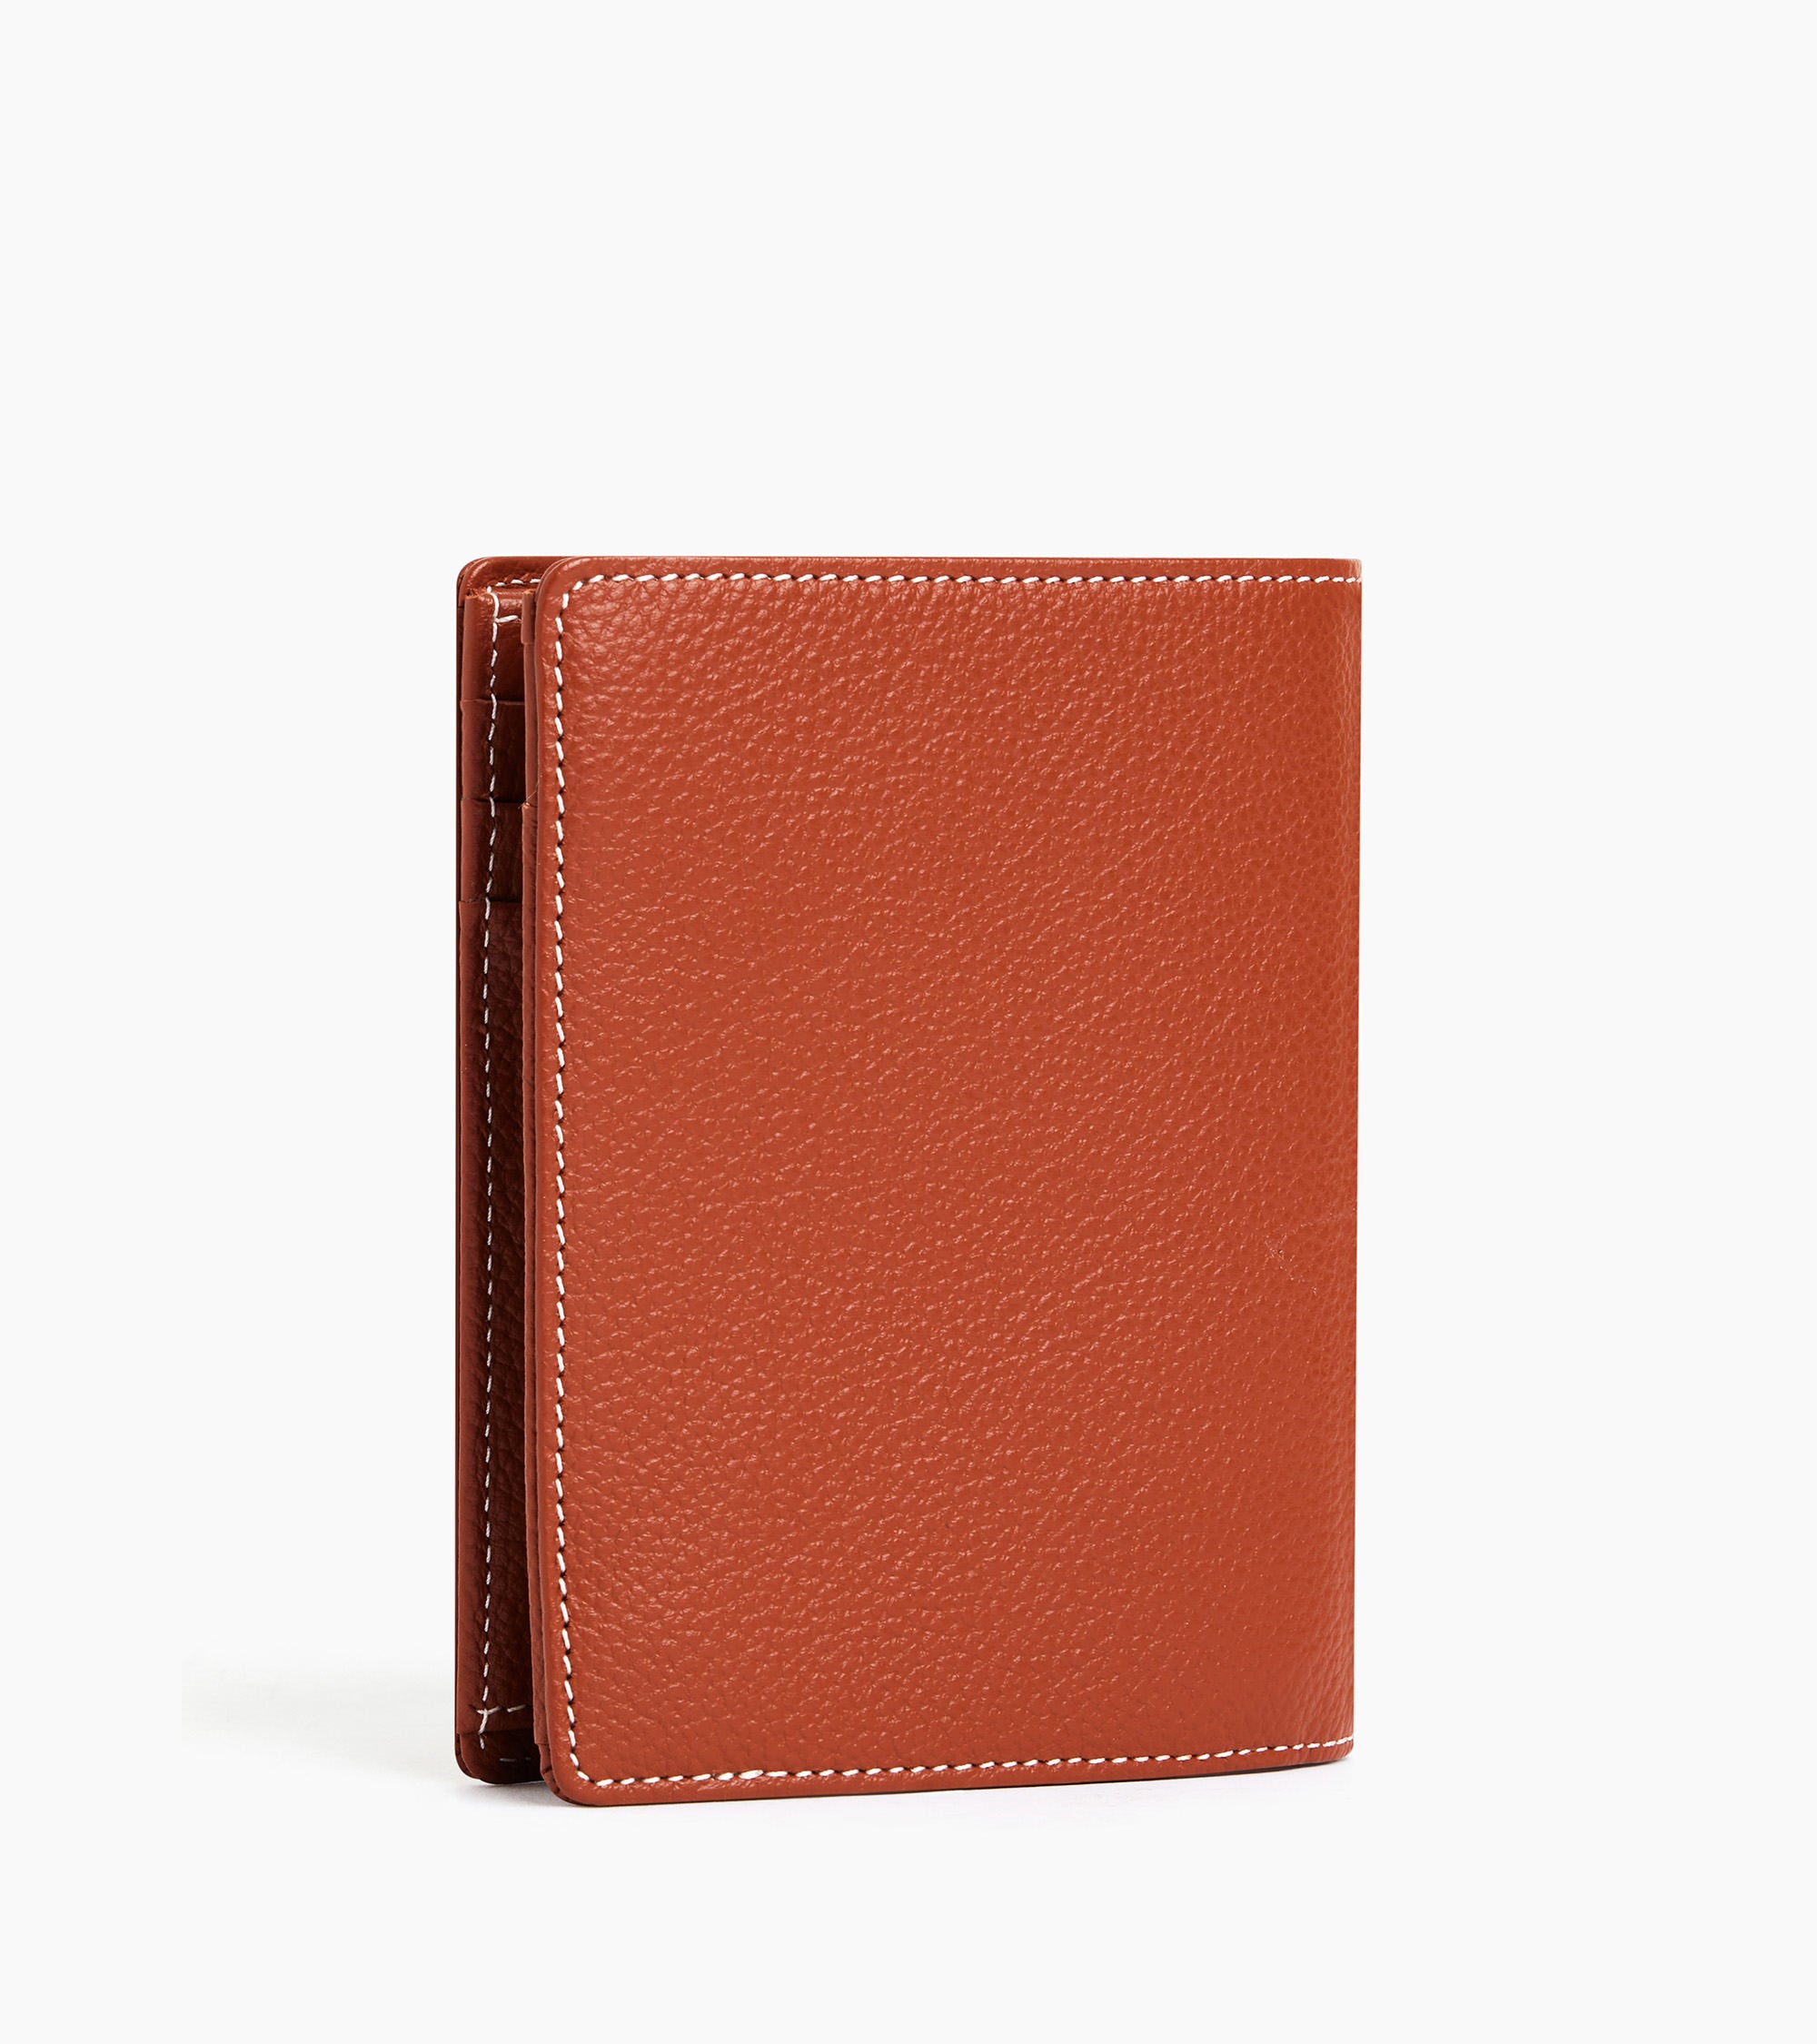 Emile vertical, zipped wallet with 2 gussets in grained leather